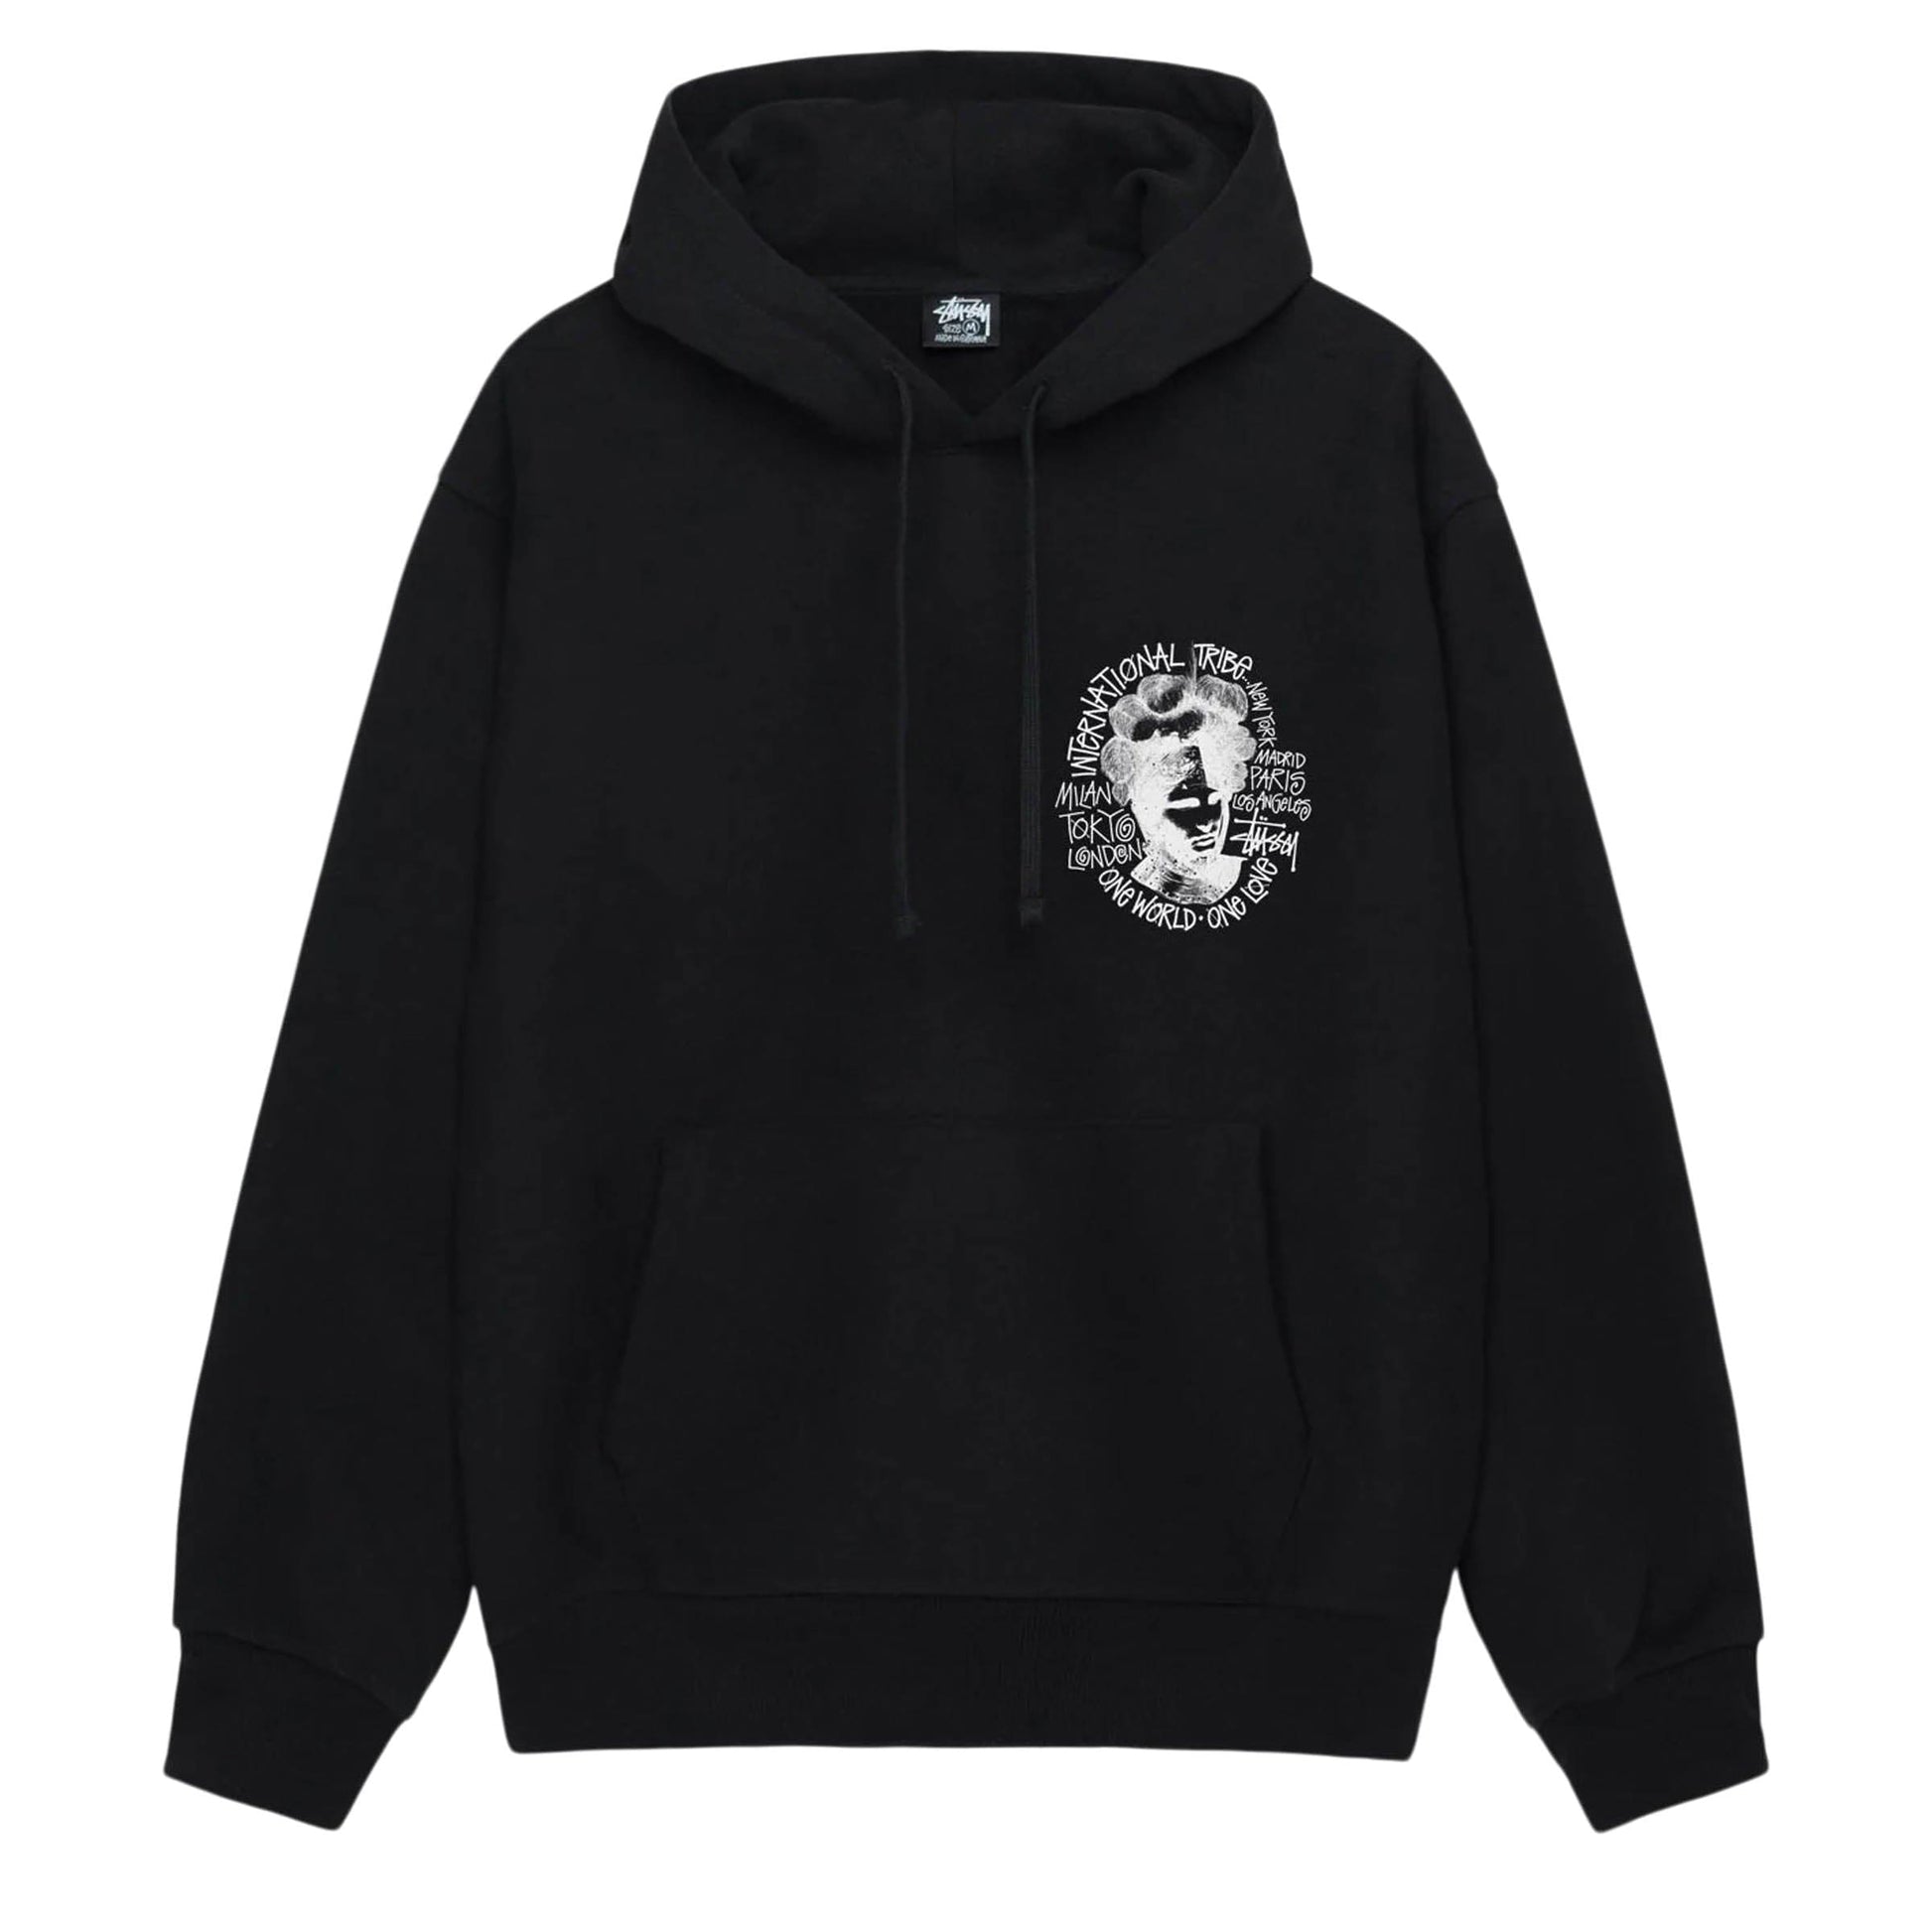 Stussy In 60 years of wearing m and s clothing have I felt so dissatisfied CAMELOT HOODIE